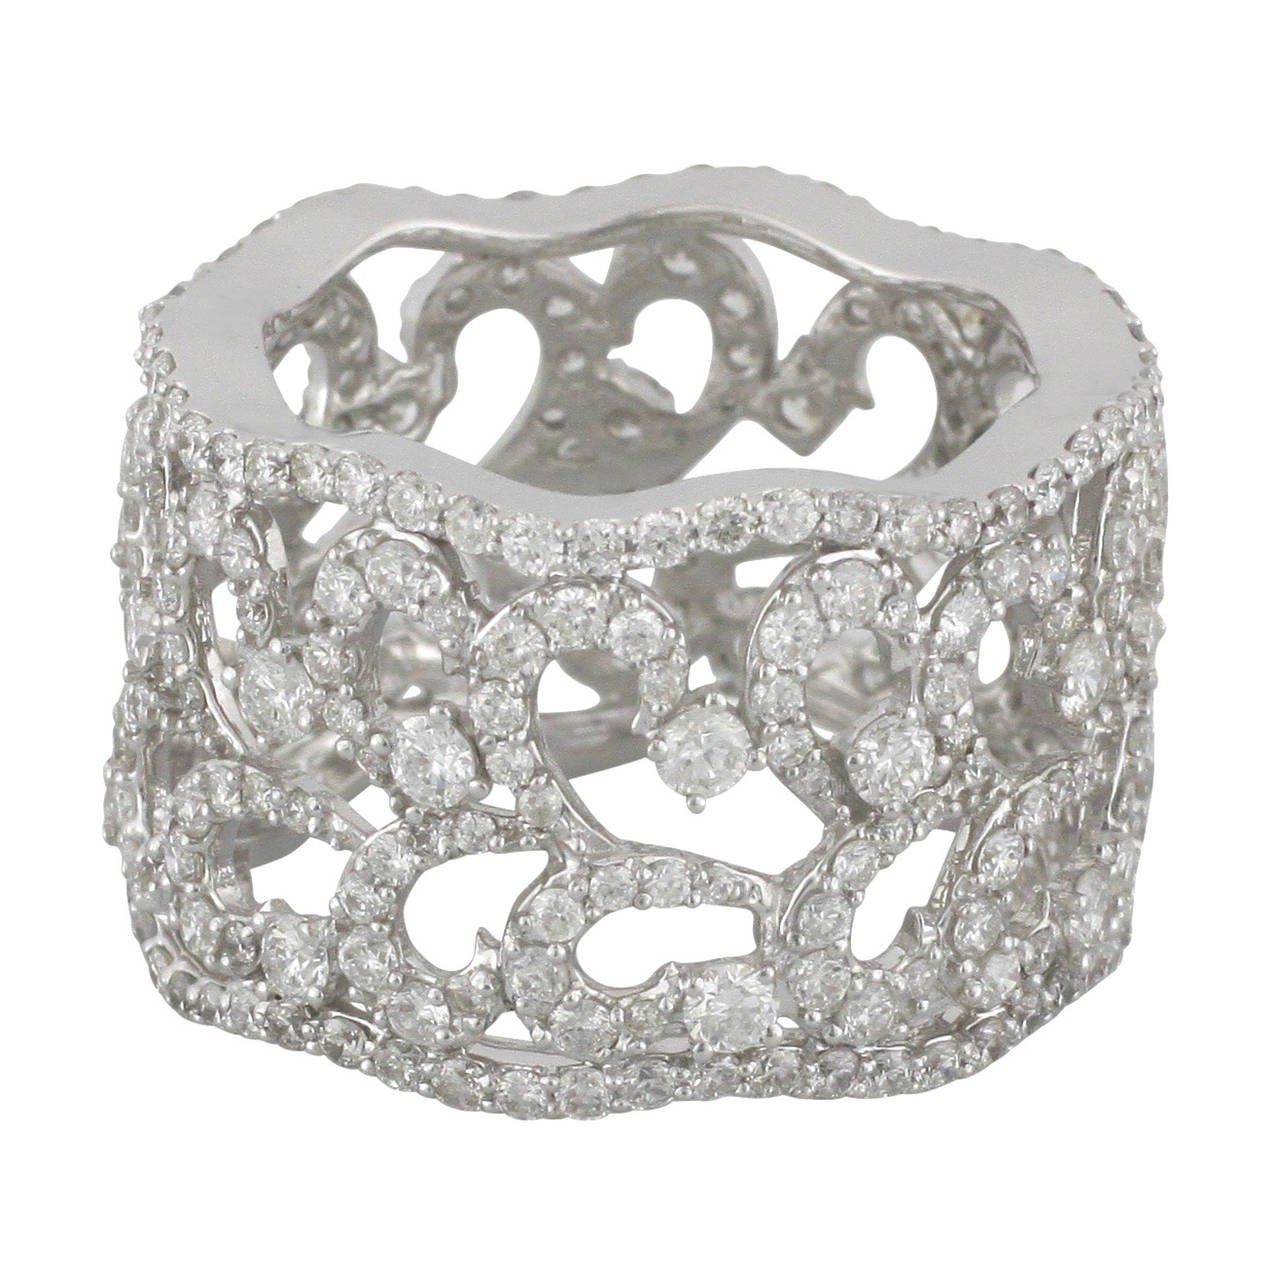 This 18kt white gold band is set with natural round brilliant cut diamonds that weigh 3.49ct.  The band is 14.5 millimeters wide, very light and comfortable.